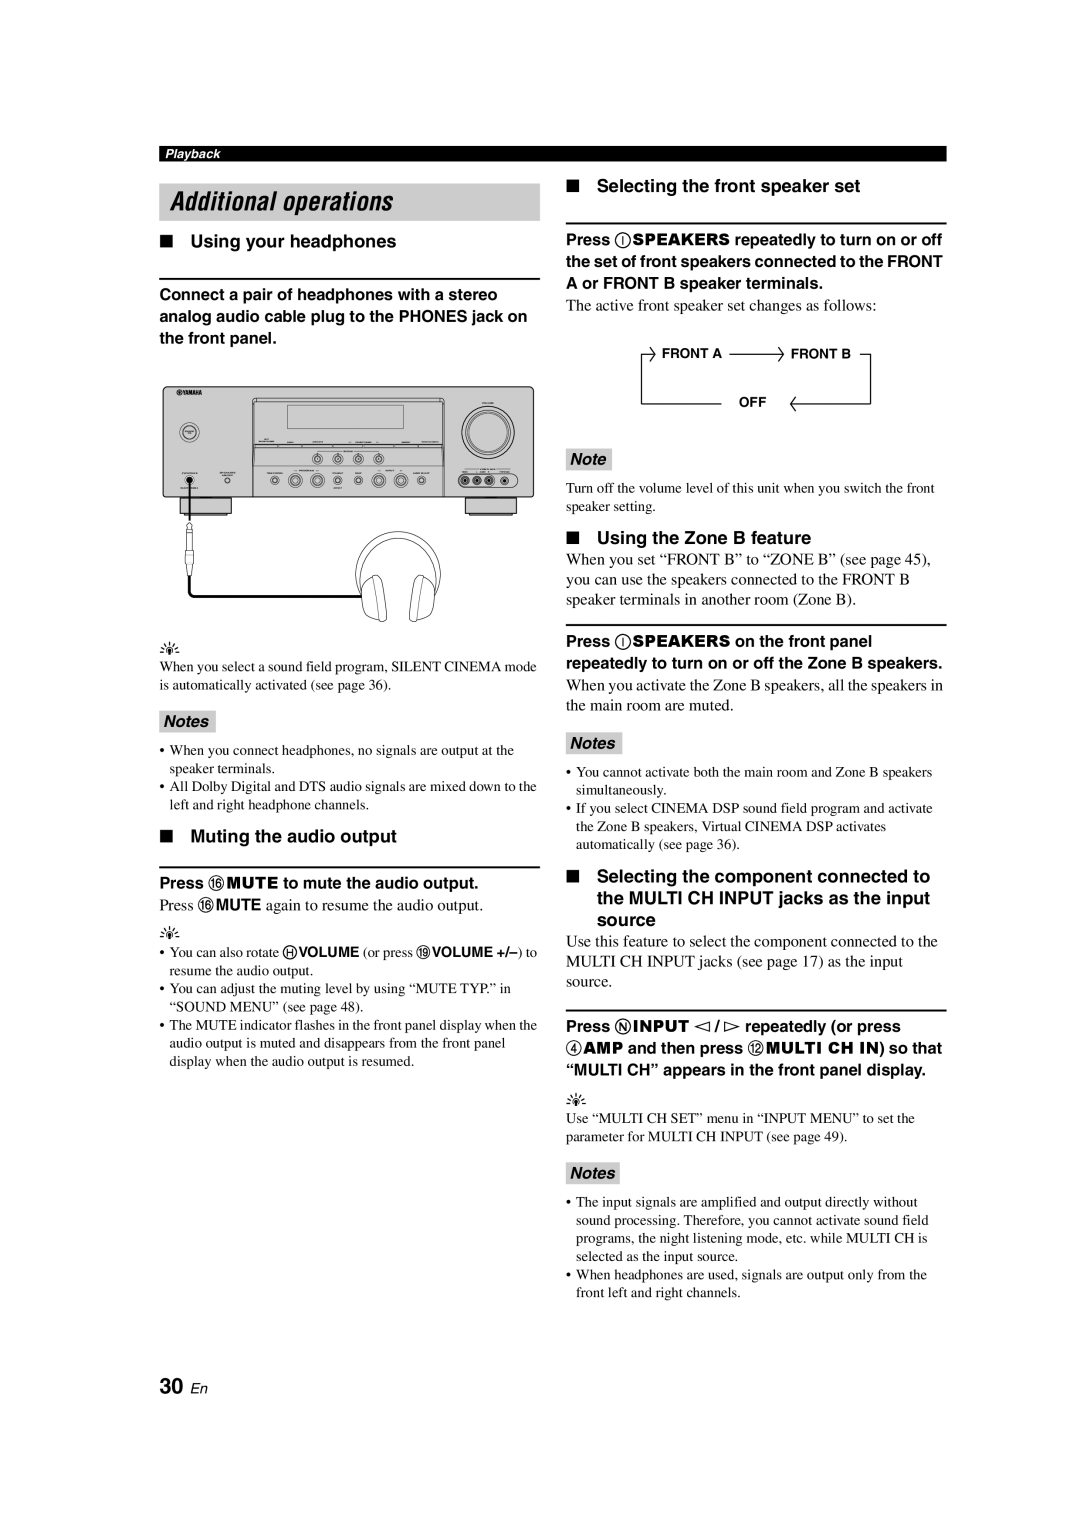 Yamaha HTR-6130 owner manual 30 En, Using your headphones, Muting the audio output, Selecting the front speaker set, source 